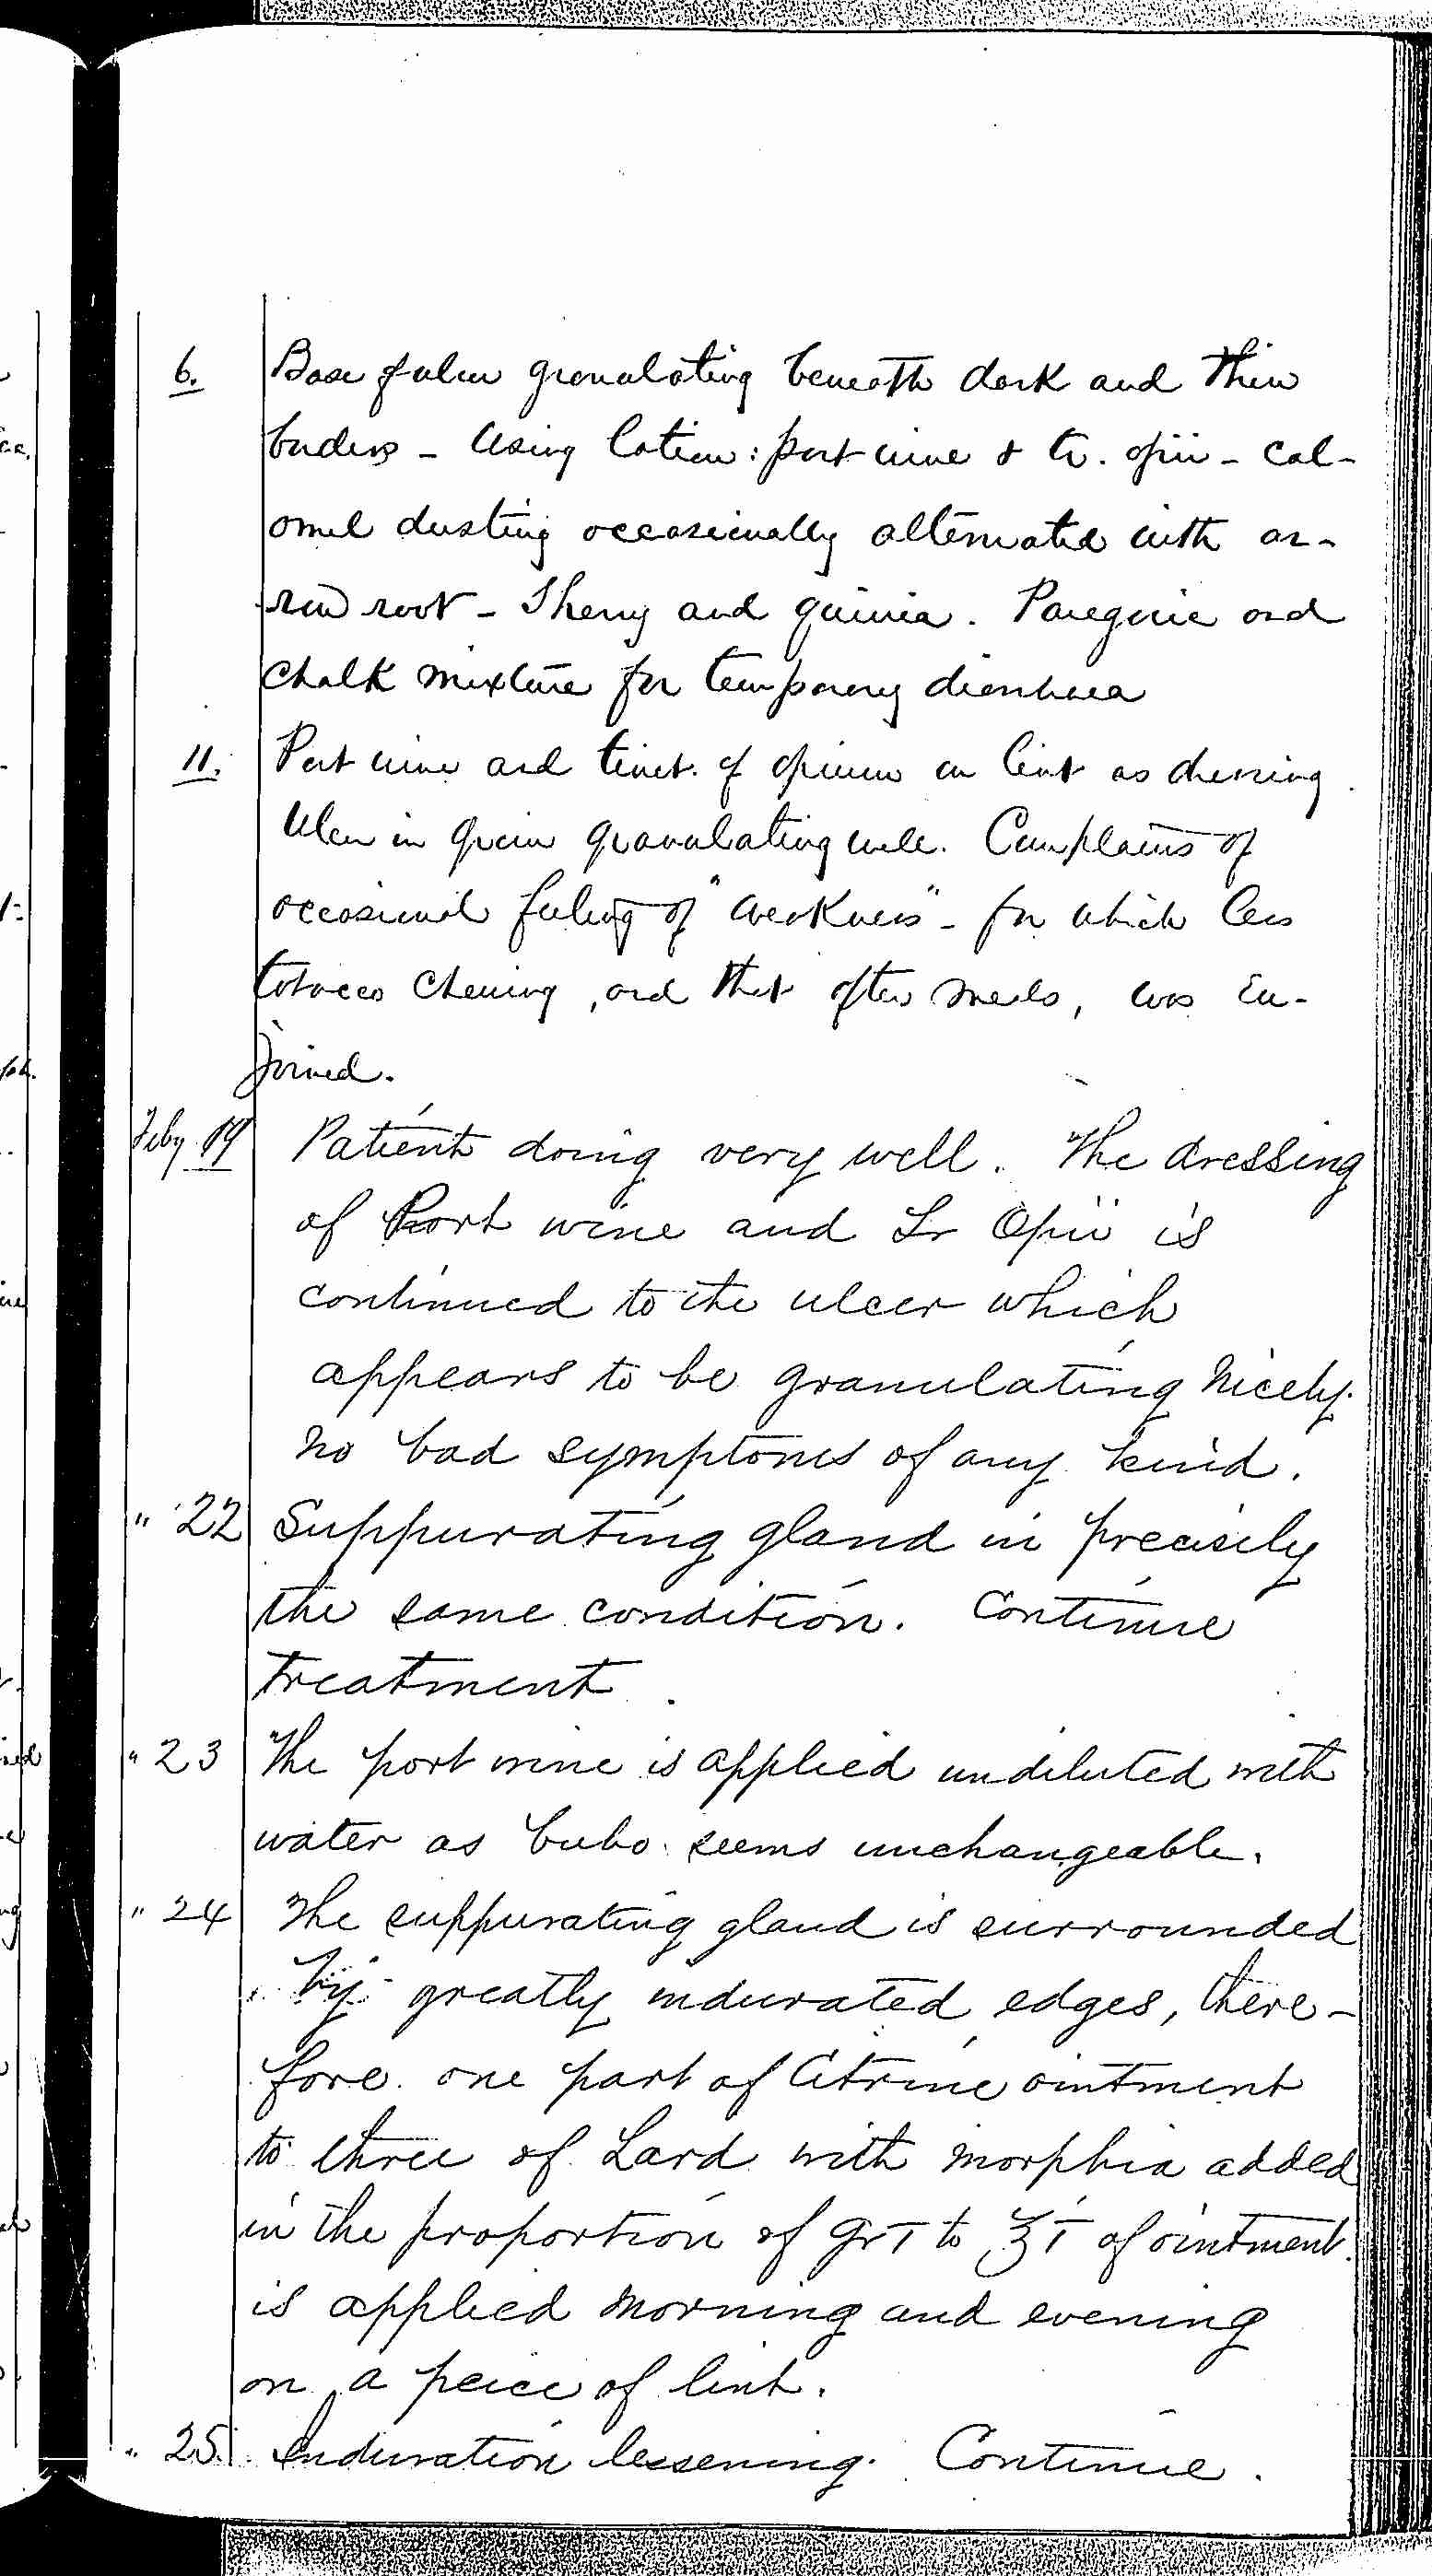 Entry for John H. Denning (first admission page 3 of 9) in the log Hospital Tickets and Case Papers - Naval Hospital - Washington, D.C. - 1868-69